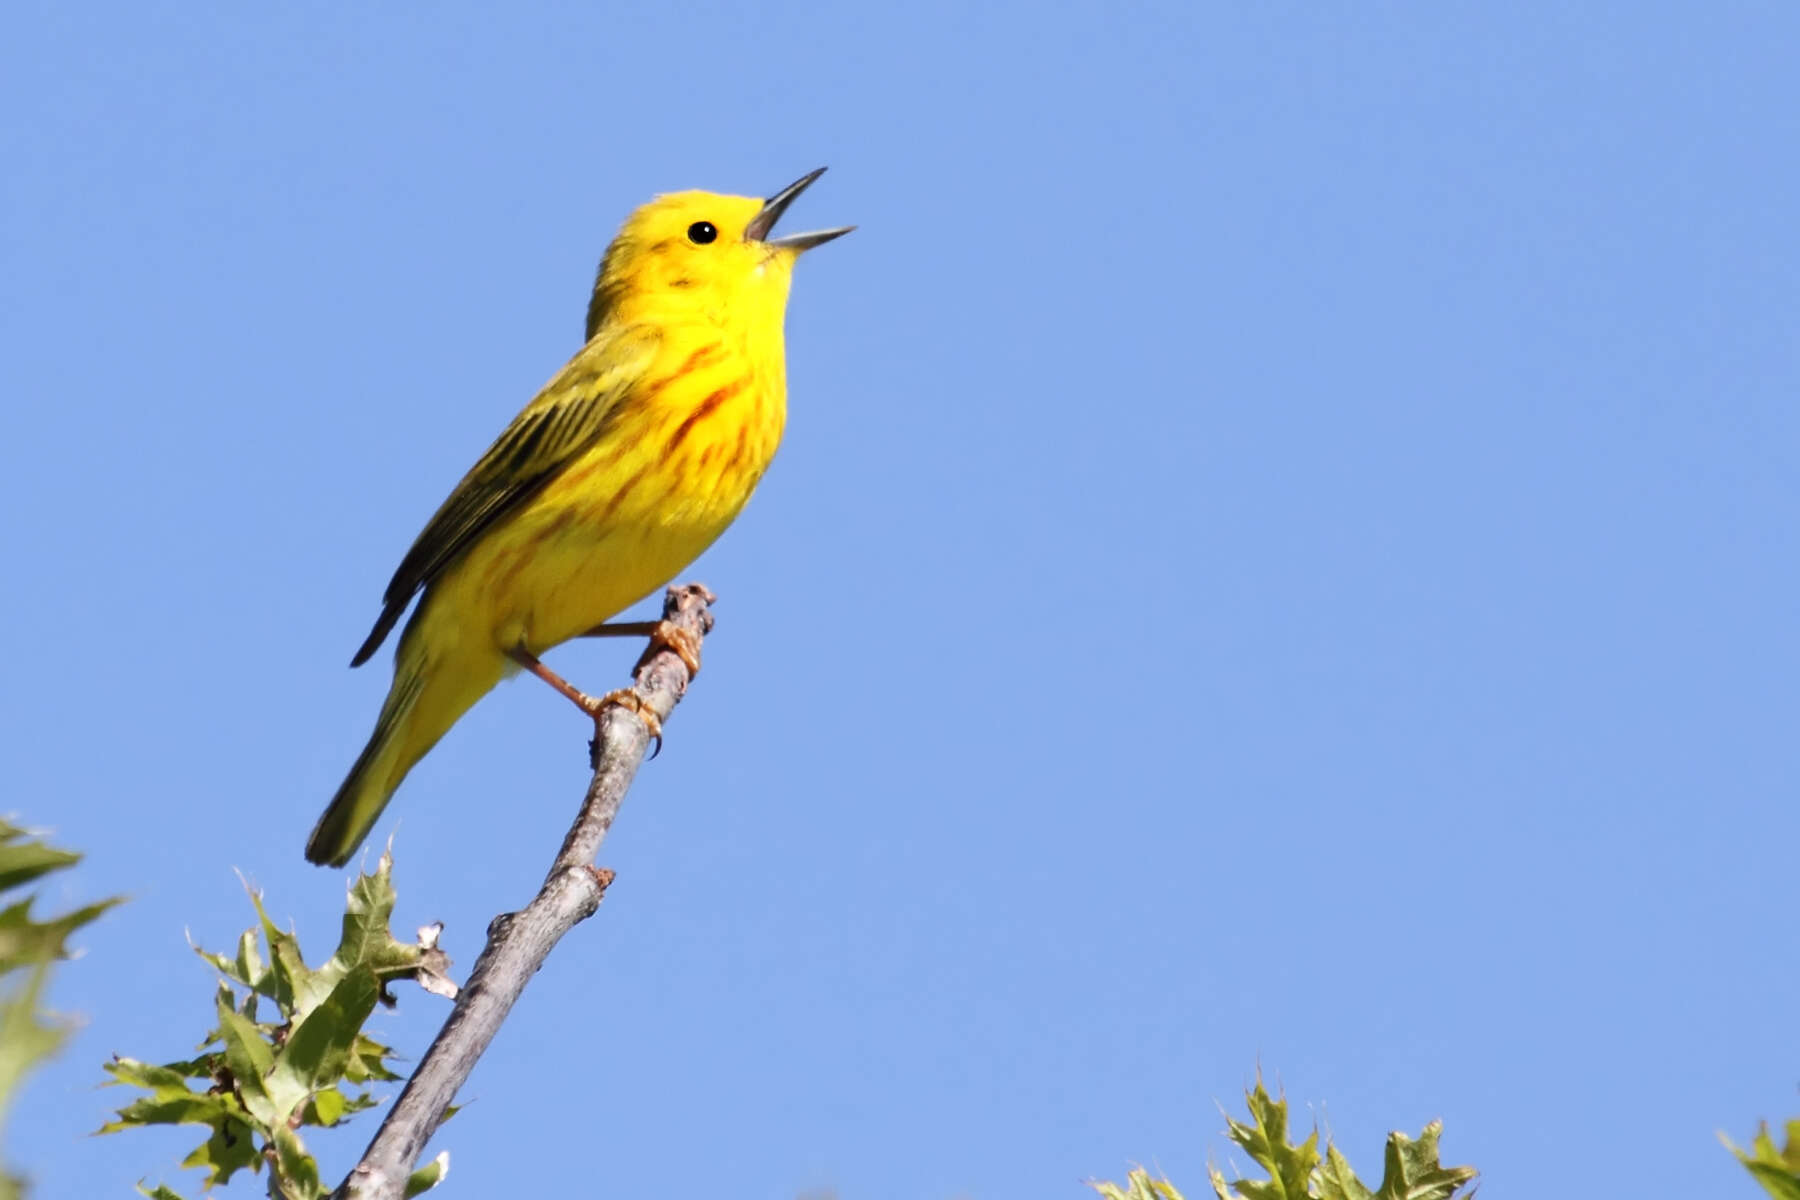 Image of a Yellow Warbler